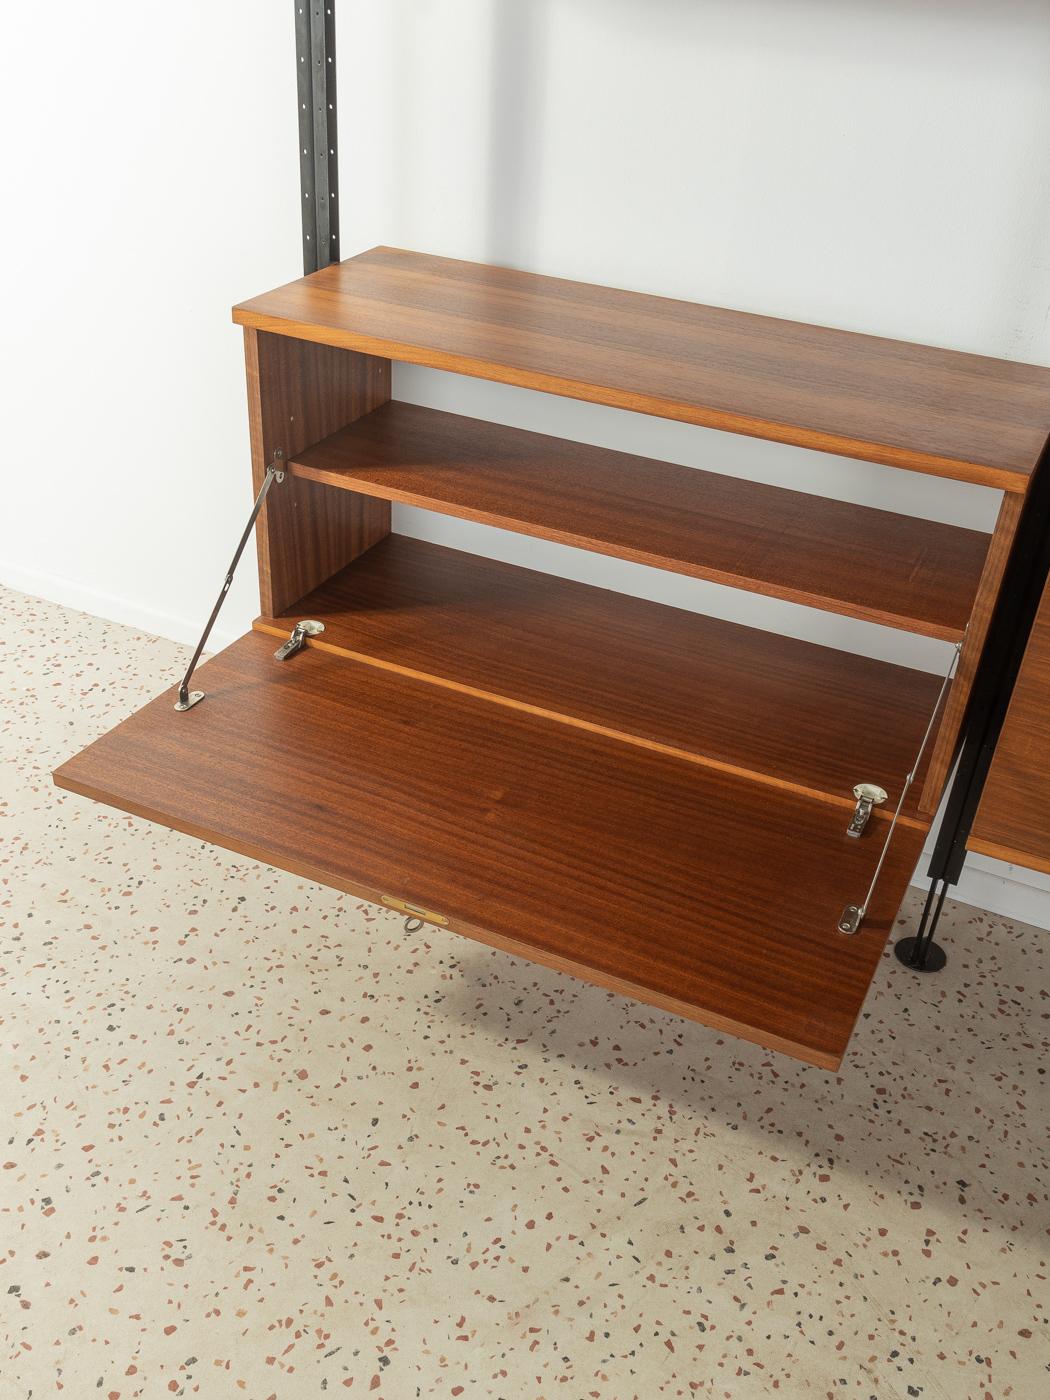 1960s Shelving System Wall Shelf Designed by Richard Neutra In Good Condition For Sale In Neuss, NW